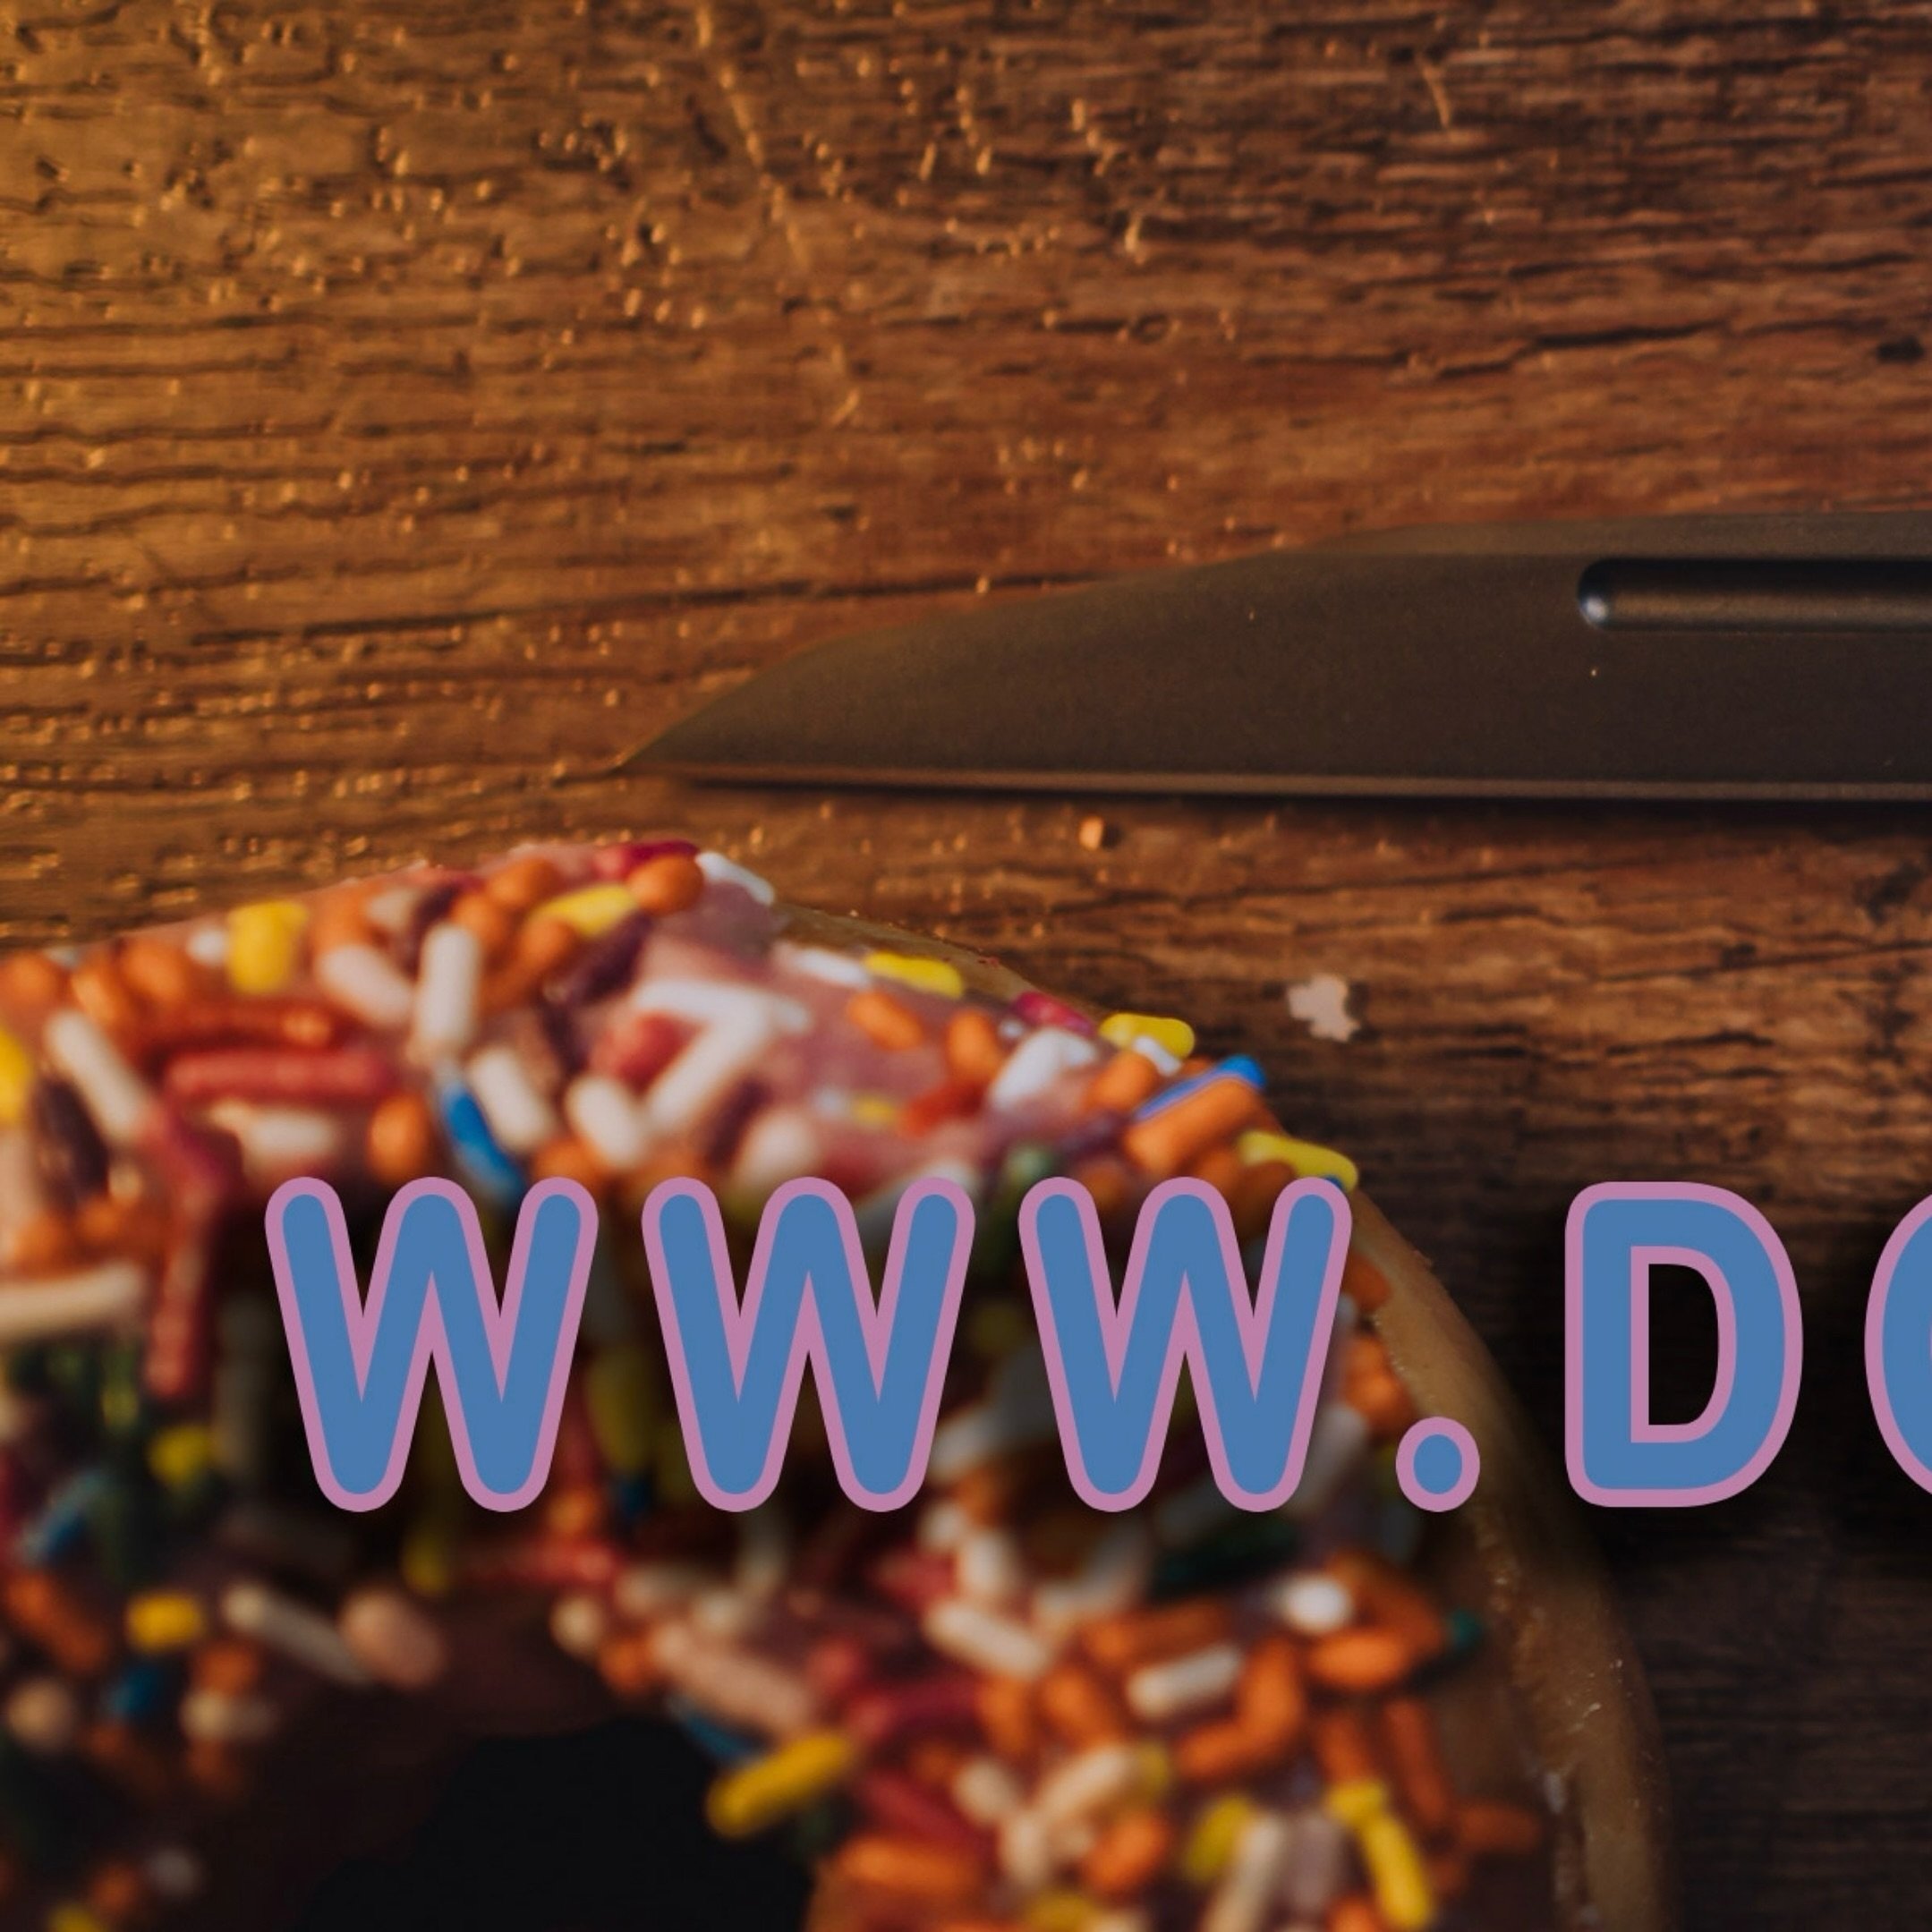 The new @ocaso_knives EXCLUSIVE is available now! Snag that and more over at DONUTKNIFE.com

Fully Funded in minutes! 

Check out our NEW podcast here: 

https://youtu.be/PbFzEea3e2g?si=uVlHmv33YW3nZZo-

You can check it out here with this link:

htt